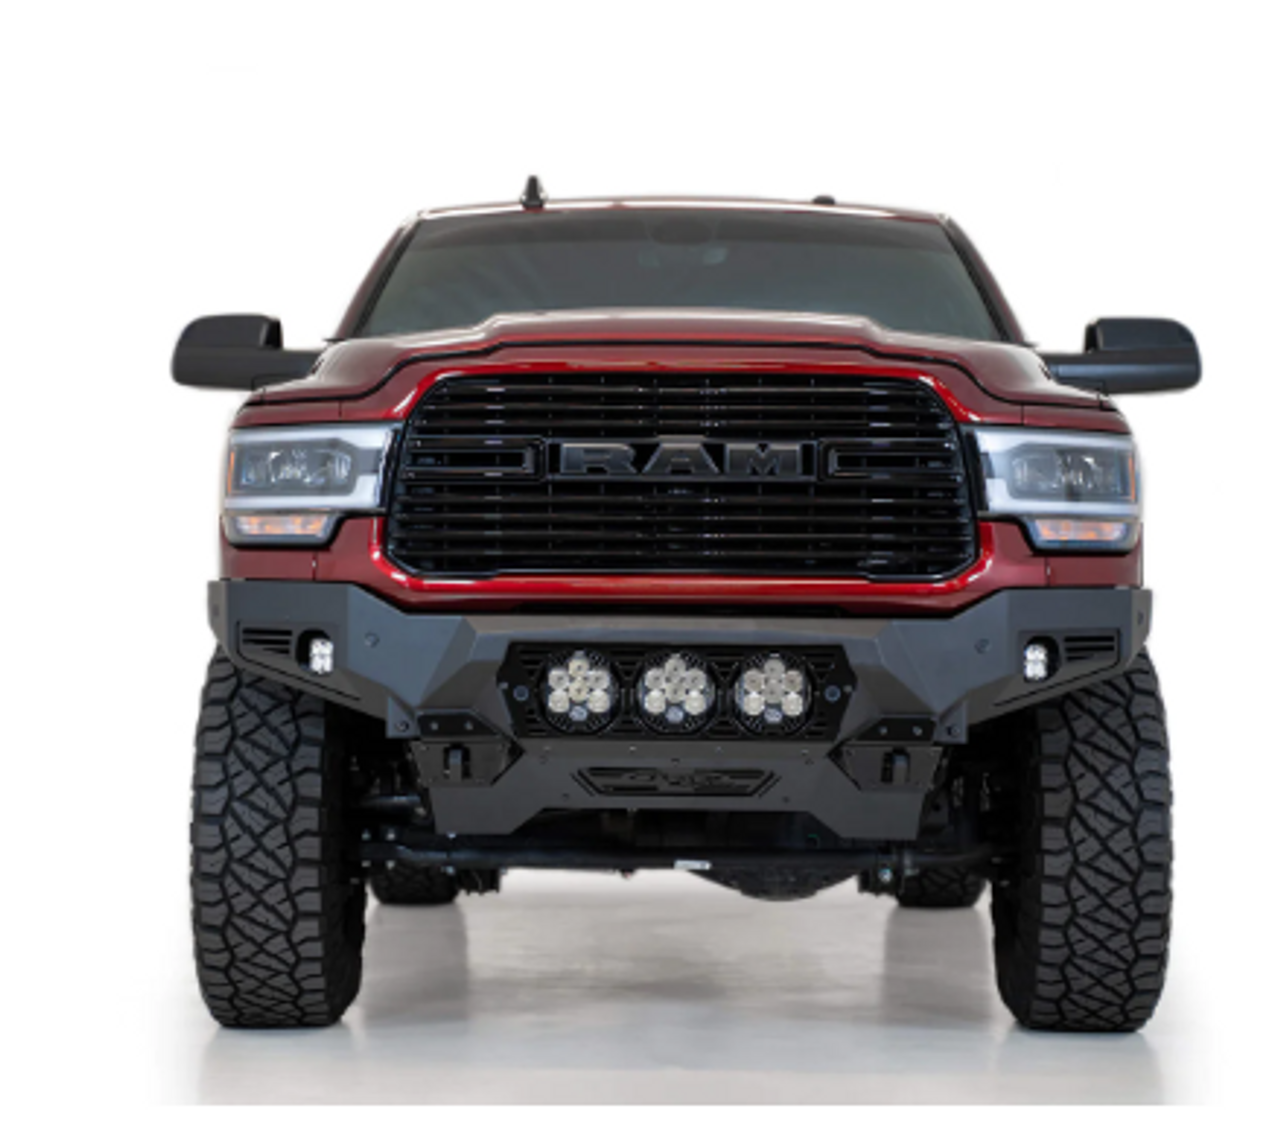 ADD Offroad F560014100103 Bomber Front Bumper for Ram 2500/3500 2019+